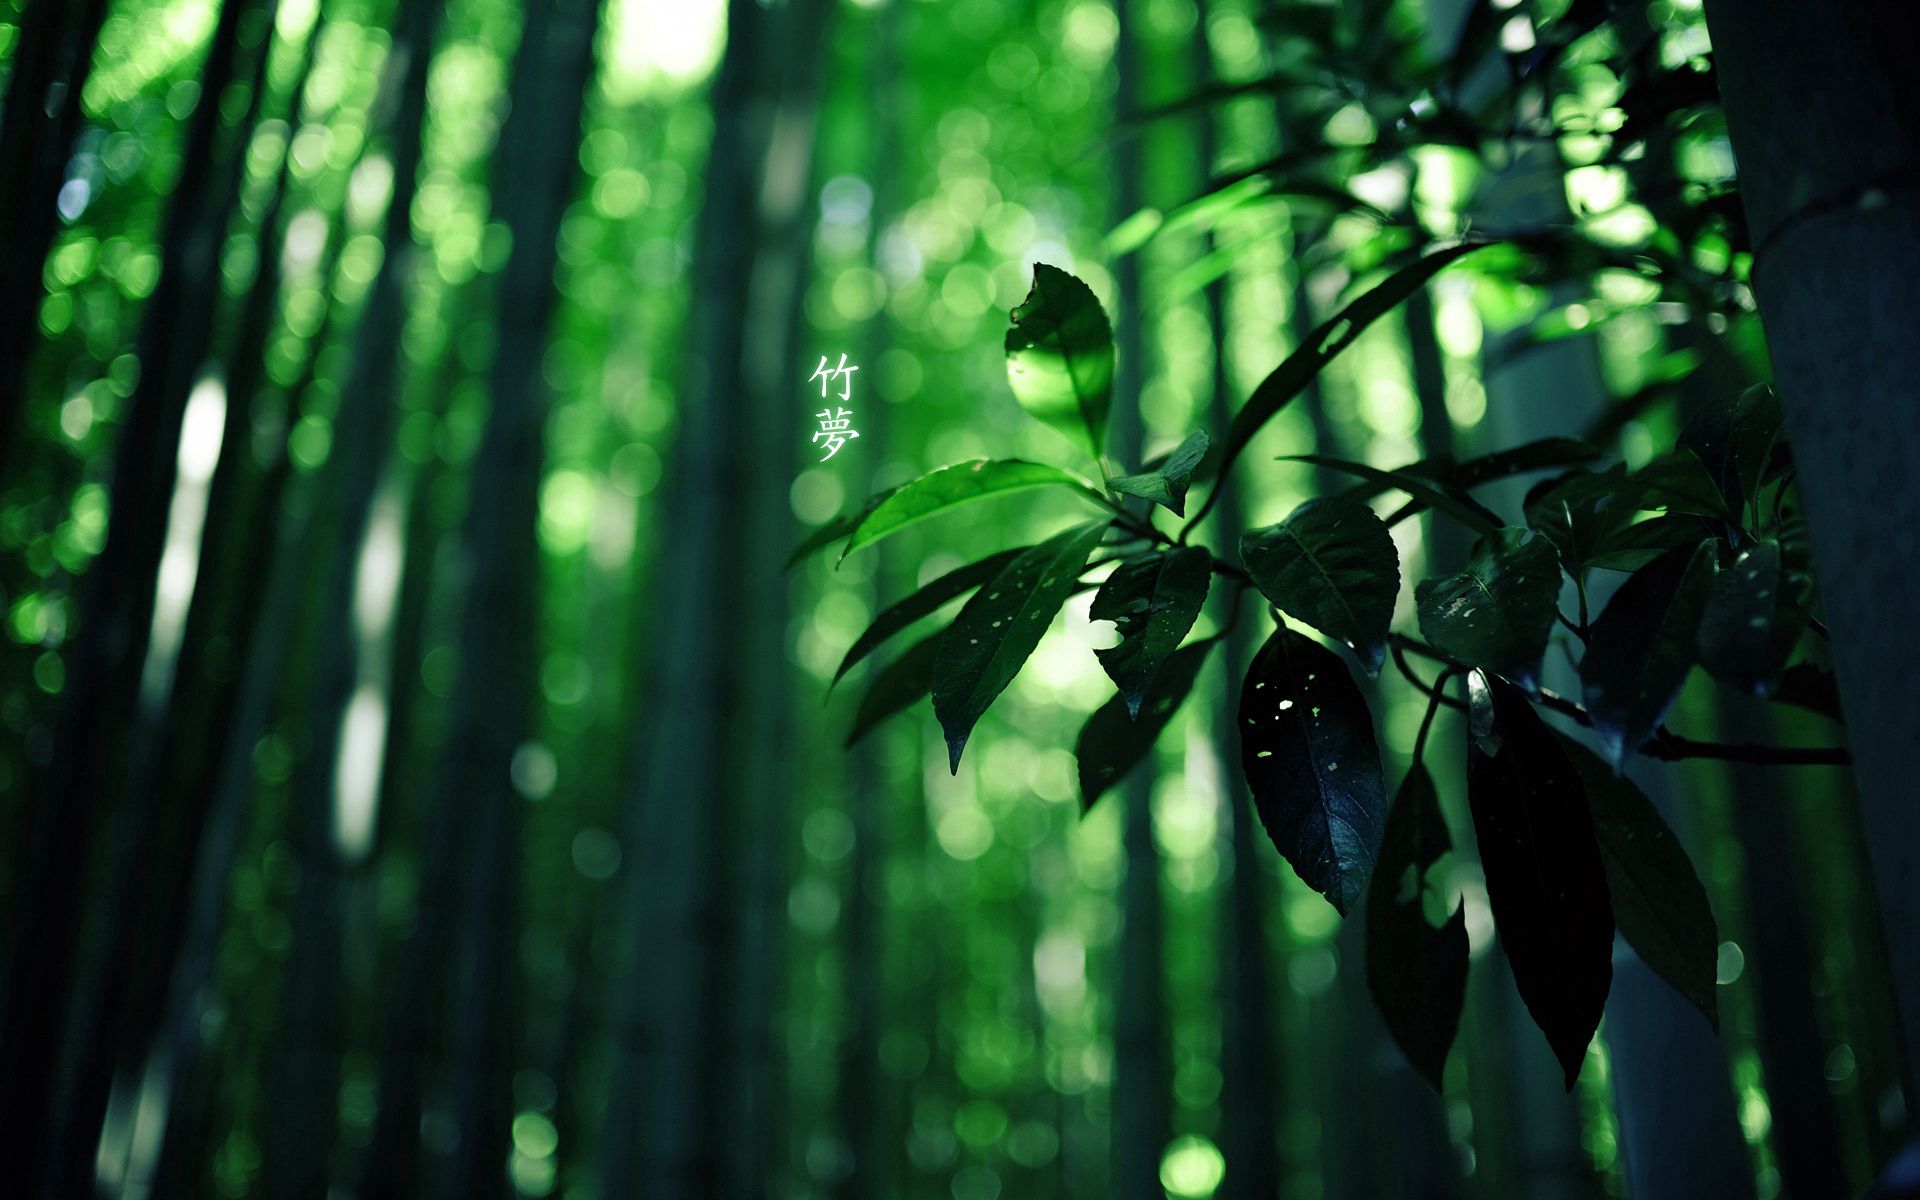 hieroglyph, nature, leaves, summer, green, forest, branch